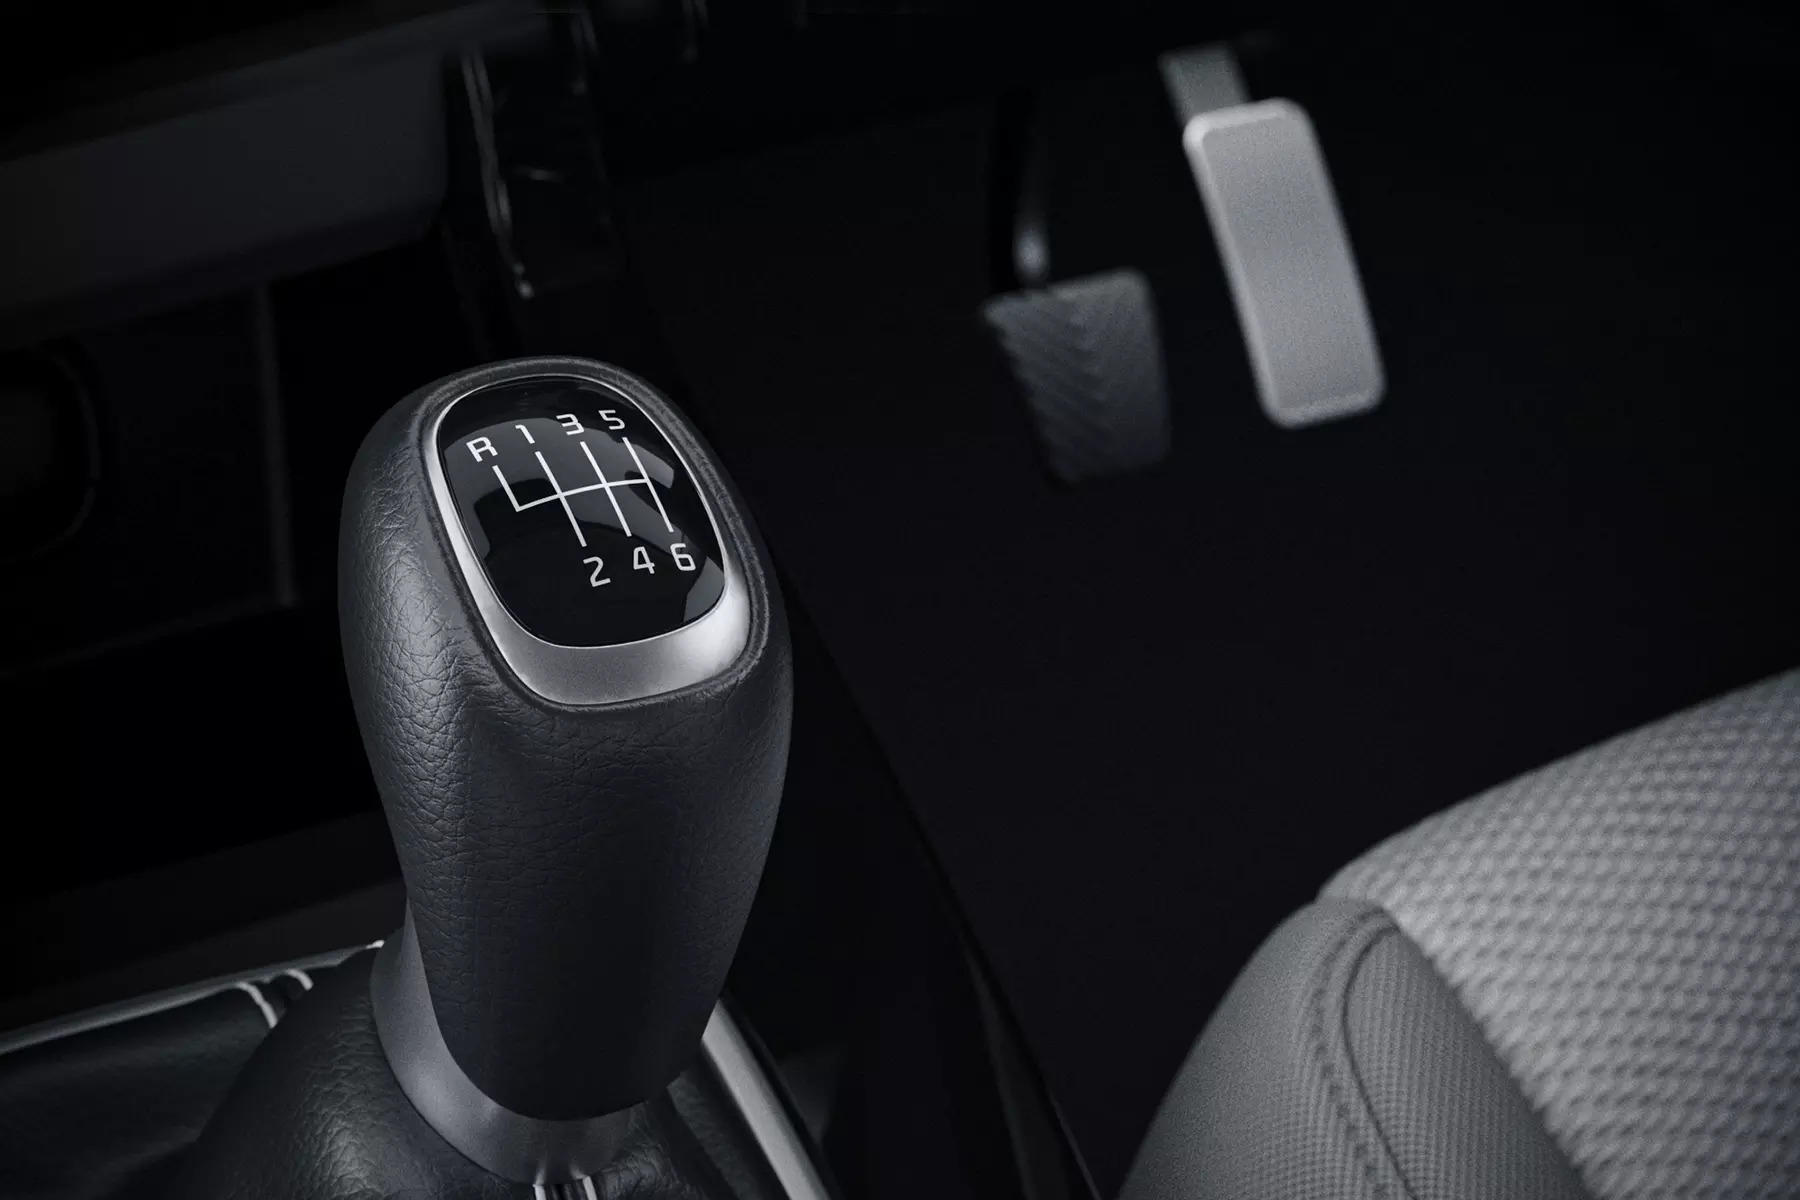 <p>The iMT technology is superior to a manual transmission and offers a range of benefits such as eliminating clutch fatigue and engine stalling in higher gears at low speeds. </p>